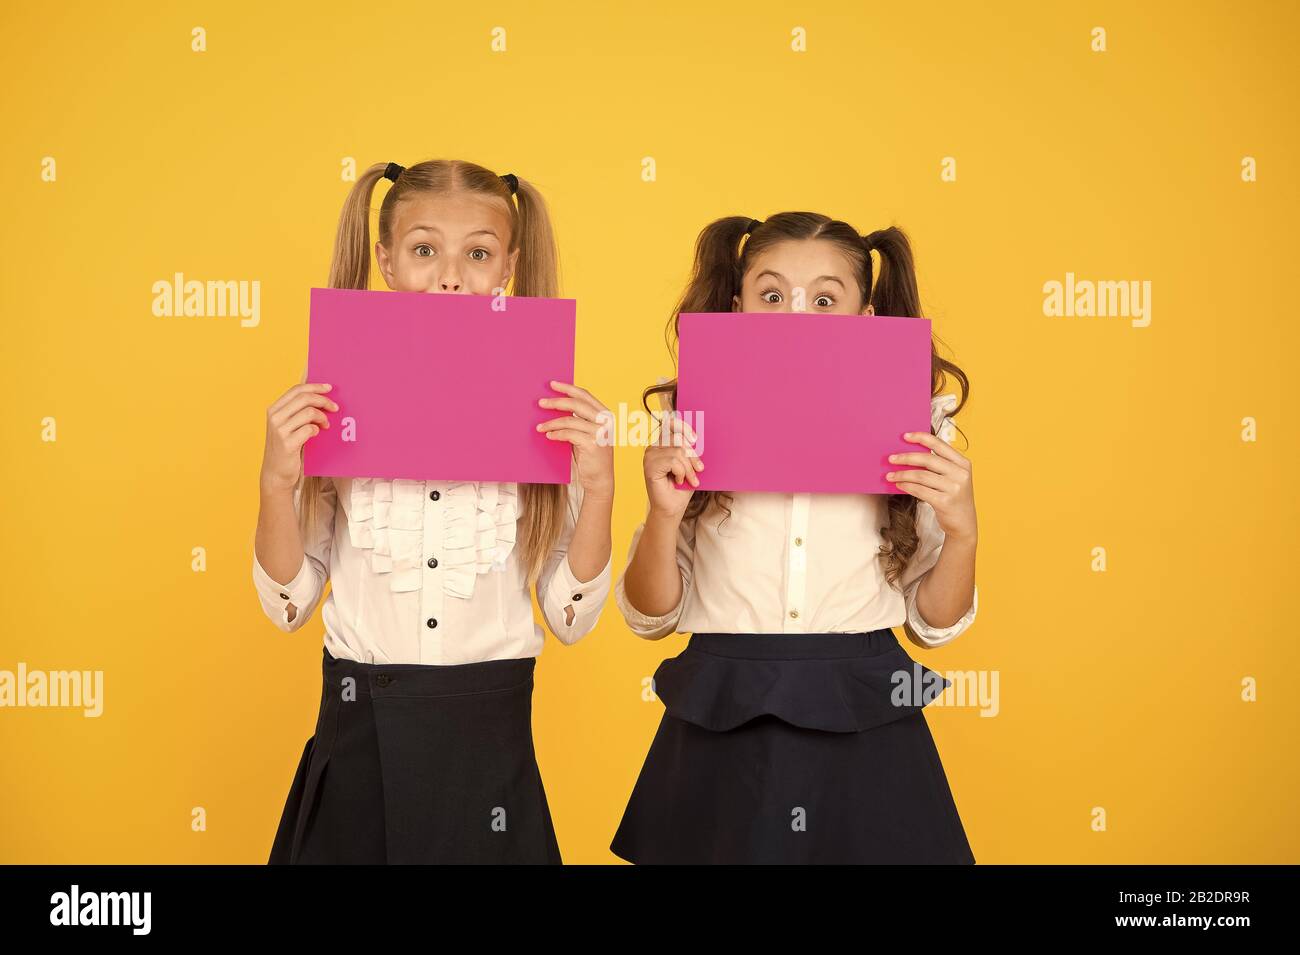 Drawing attention. Happy kids holding empty sheets of paper. Little kids smiling with pink drawing papers. Small kids smiling with blank advertisement posters. Cute kids advertising, copy space. Stock Photo